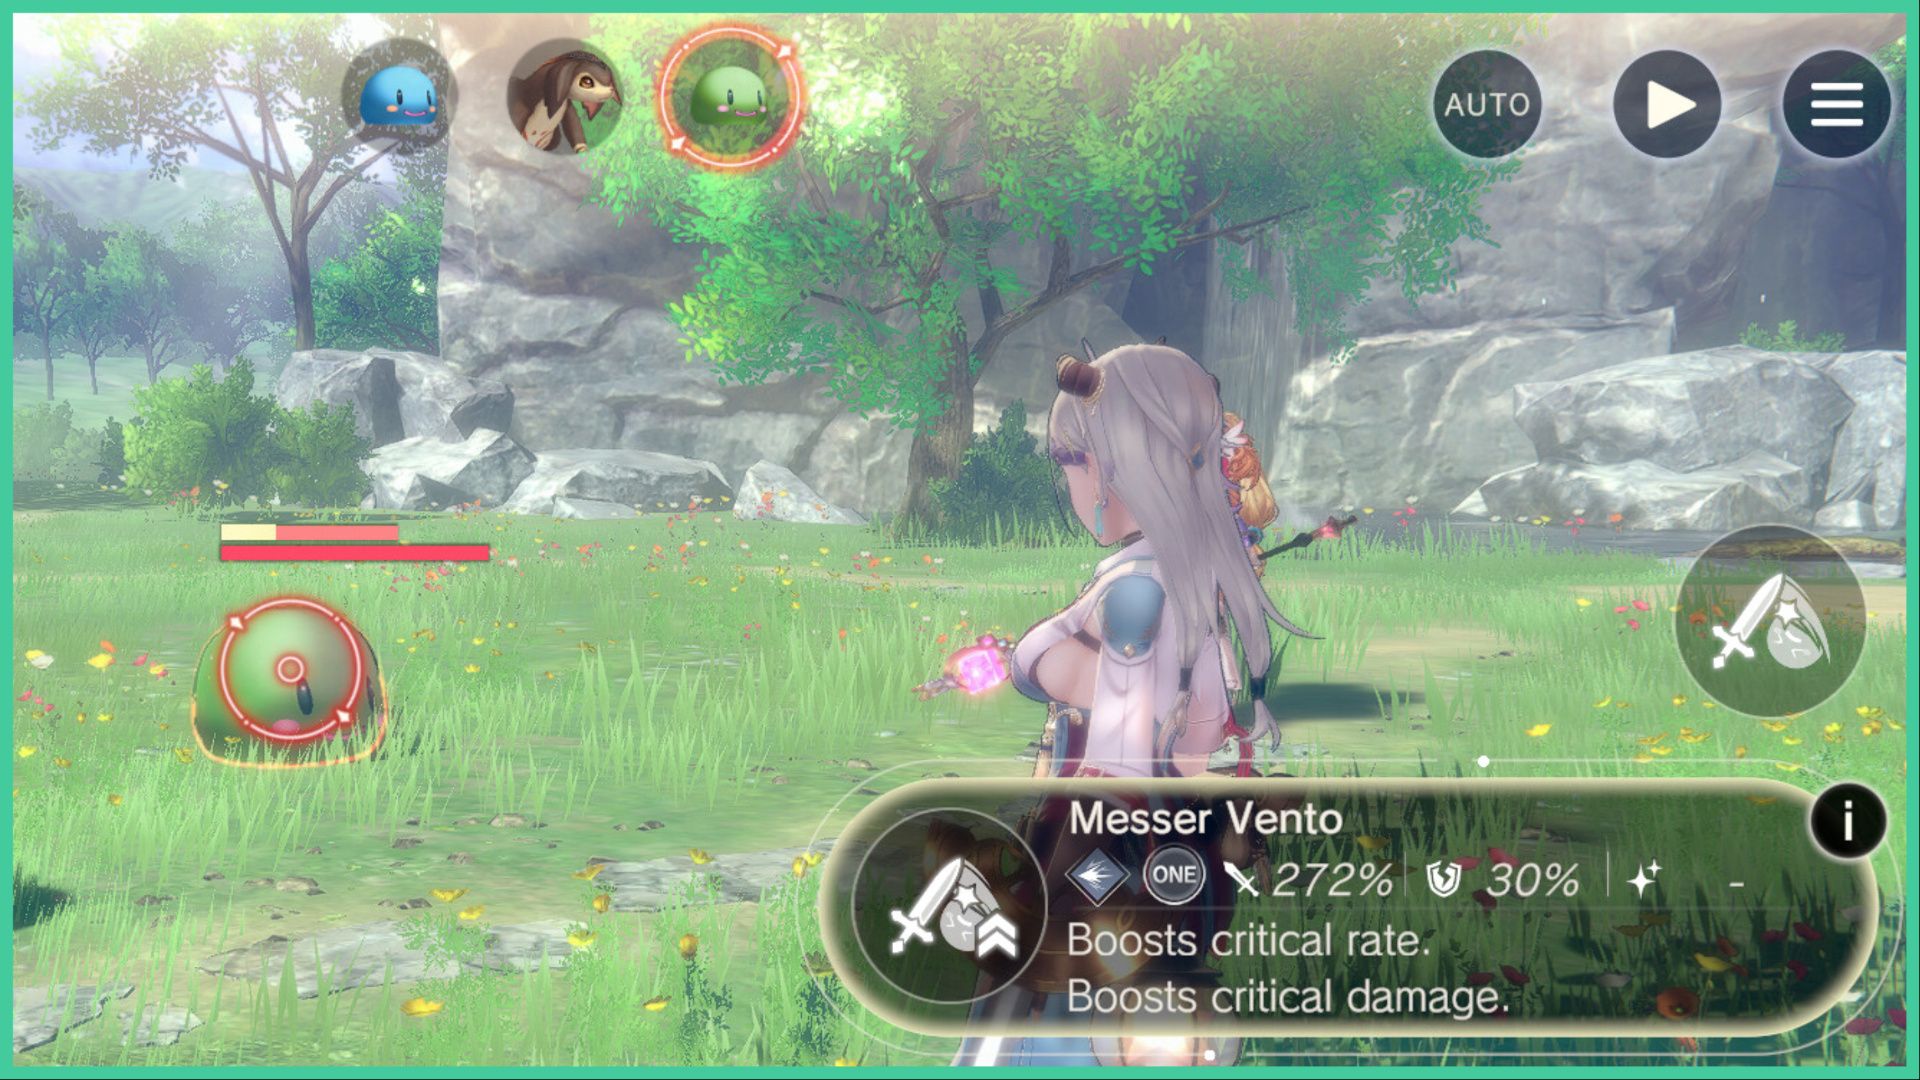 feature image for our atelier resleriana memoria tier list, the image features a screenshot from combat of a character getting ready to attack a green slime on the grass, there are stones around them as well as trees and flowers while the character holds a staff